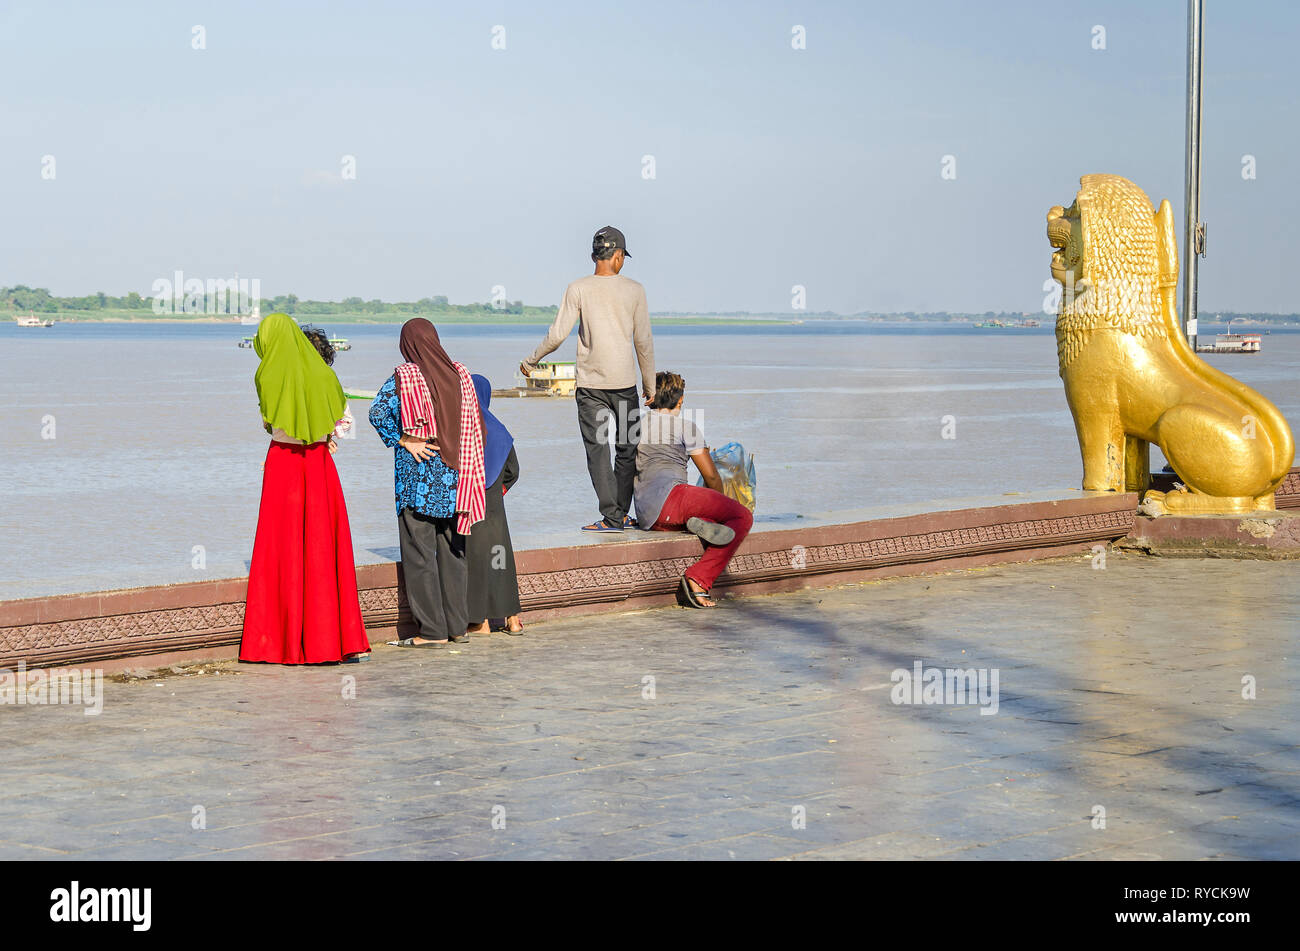 Phnom Penh, Cambodia - April 9, 2018: Preah Sisowath Quay, a riverside promenade along the banks of the Mekong and Tonle Sap rivers with a leogryph Stock Photo